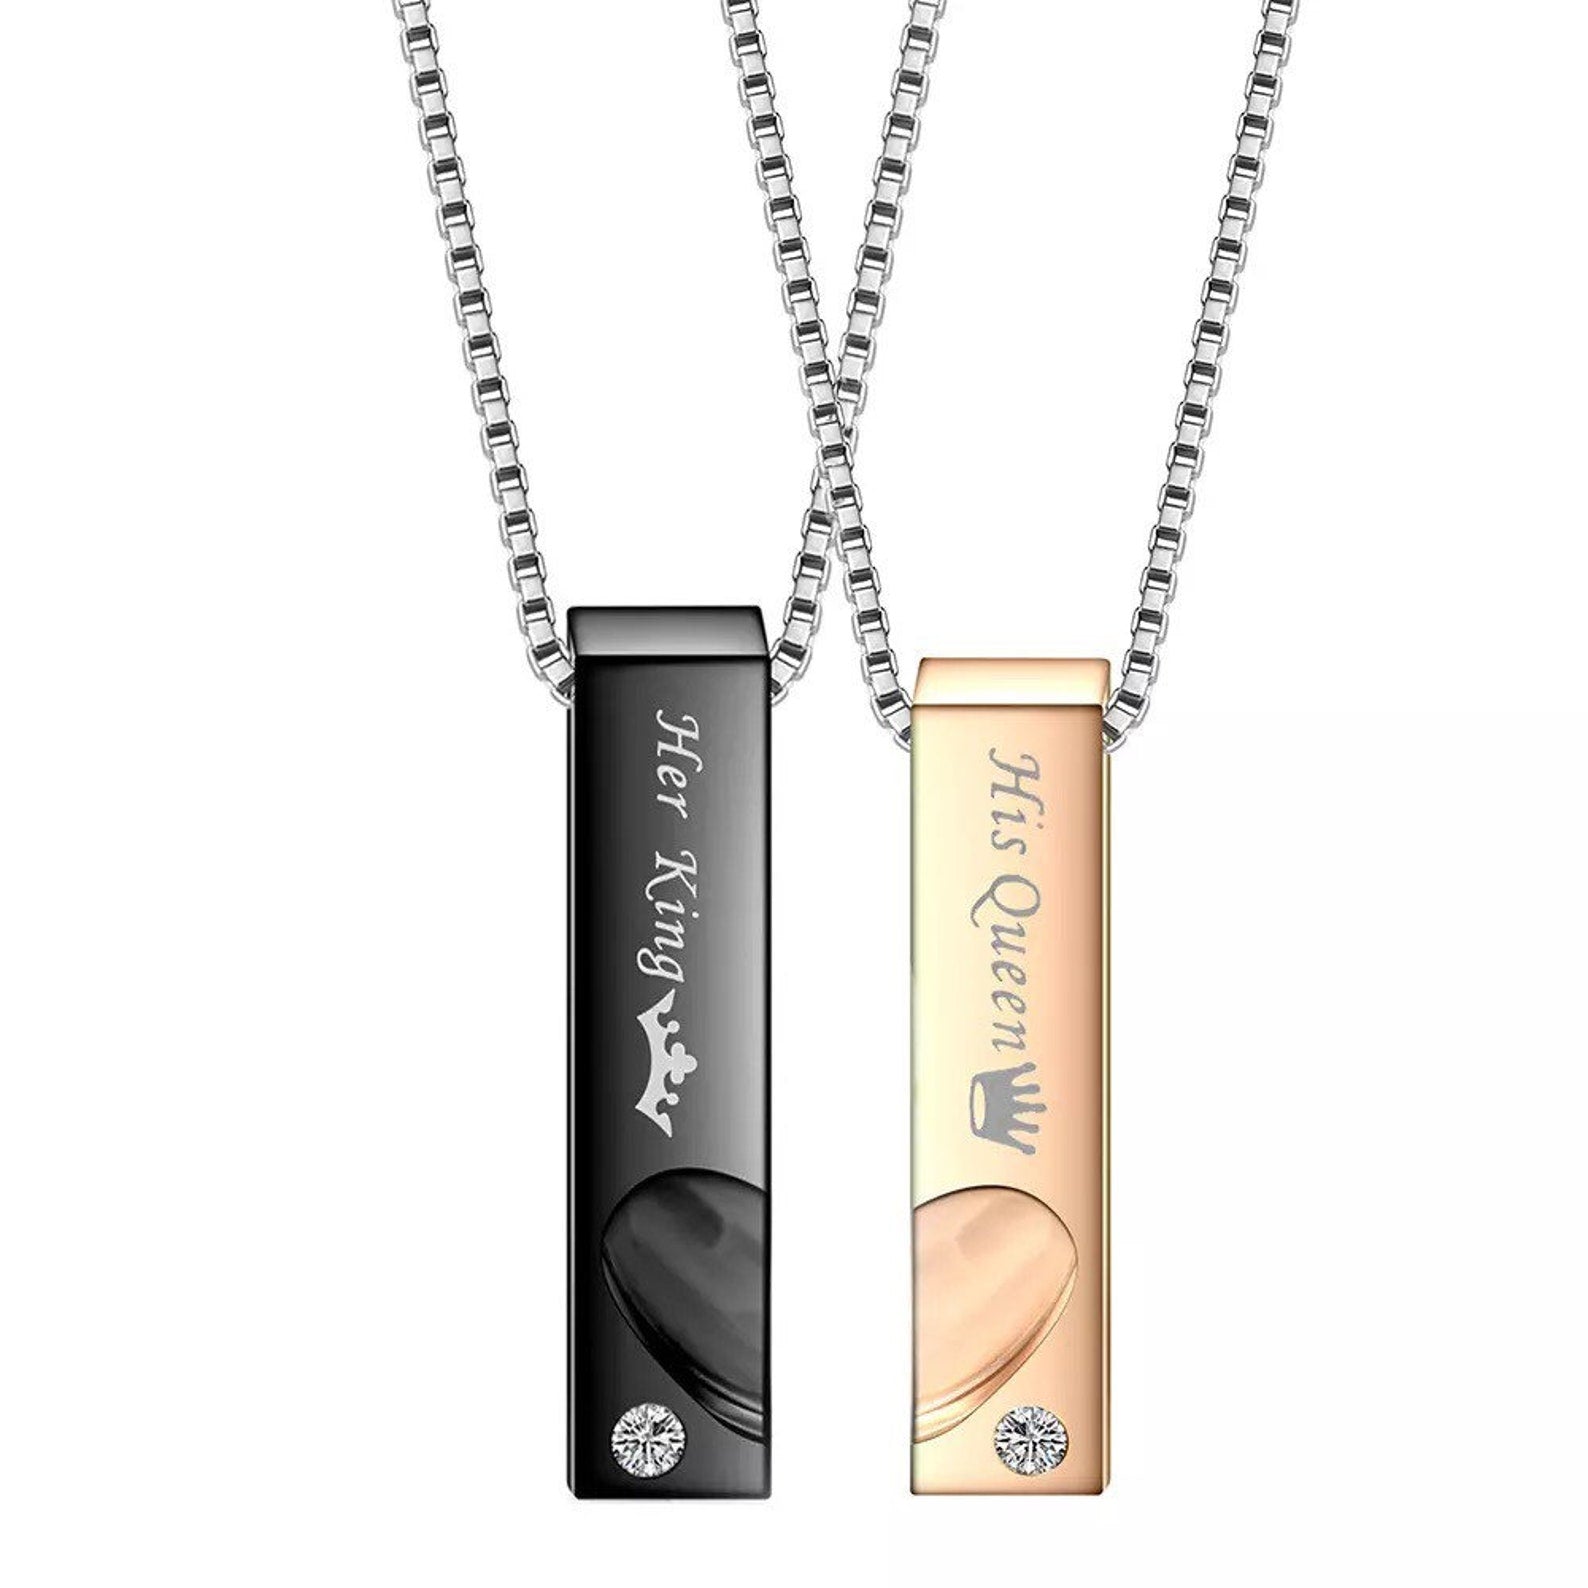 Her King & His Queen Couples Necklace in Black and Rose Gold Pendants-Couples Necklace-Auswara